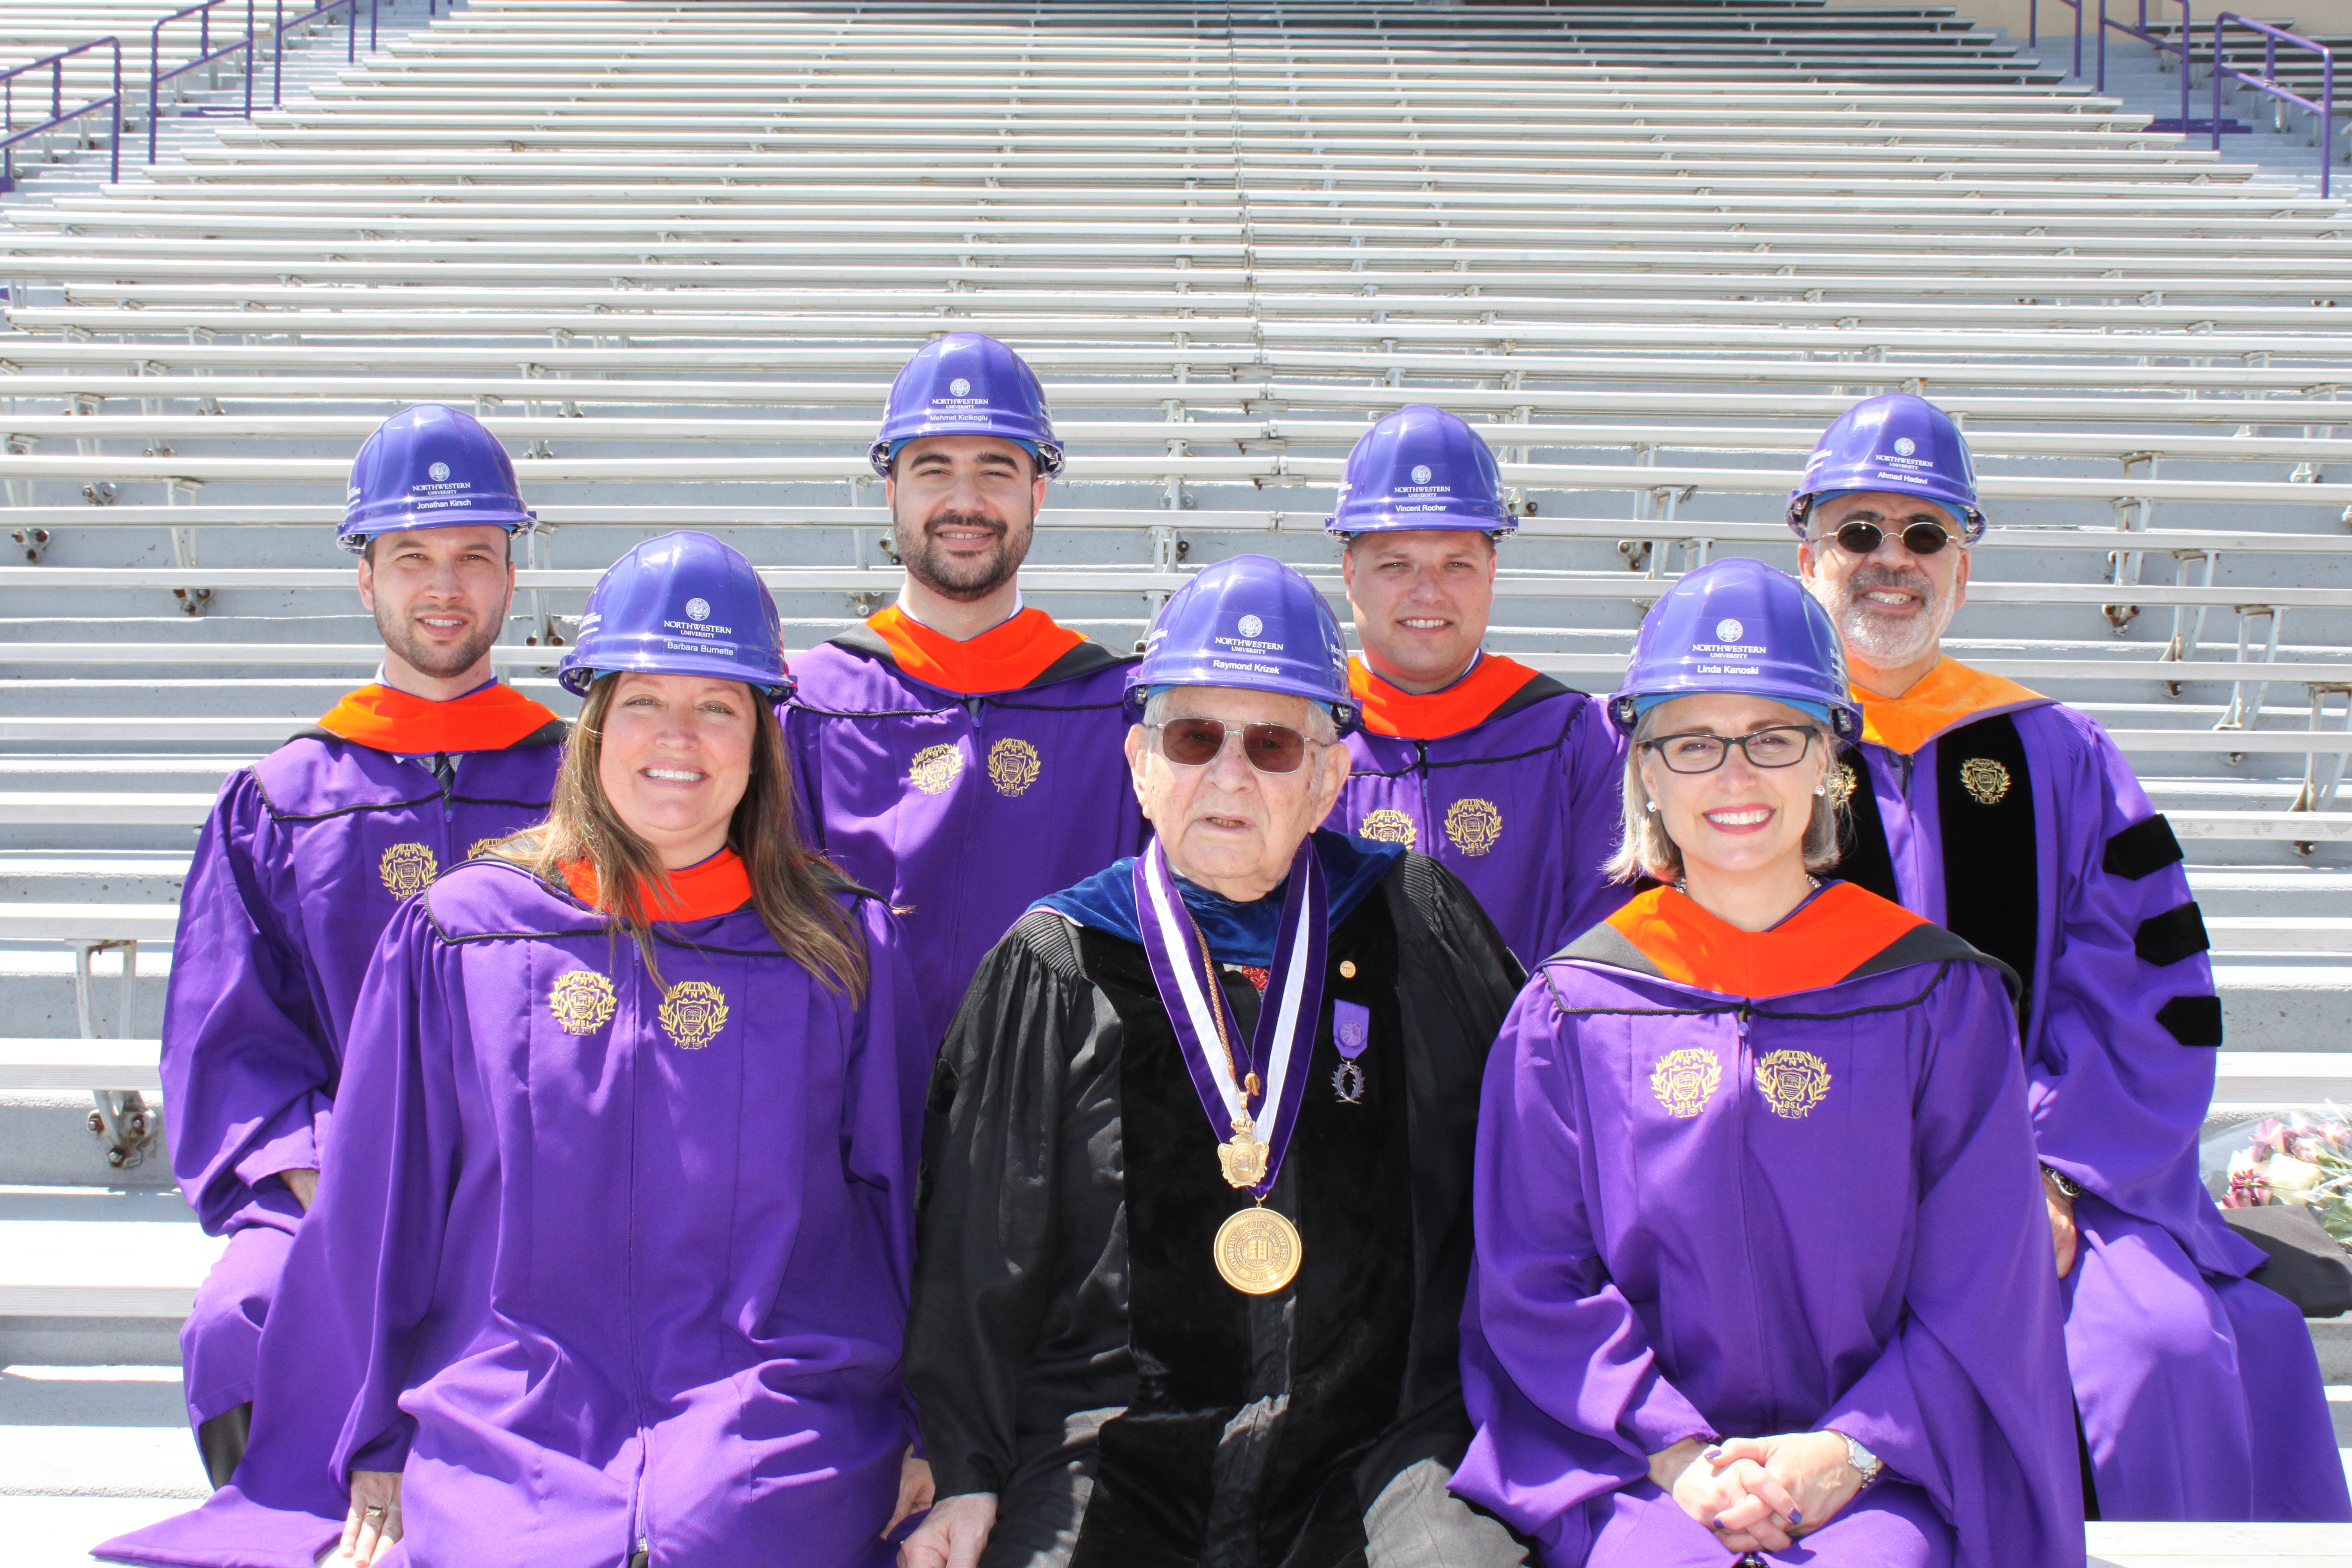 Professors Raymond Krizek (front row, center) and Ahmad Hadavi (back row, far right) pose with graduates of Northwestern Engineering's Master of Science in Executive Management for Design and Construction program.